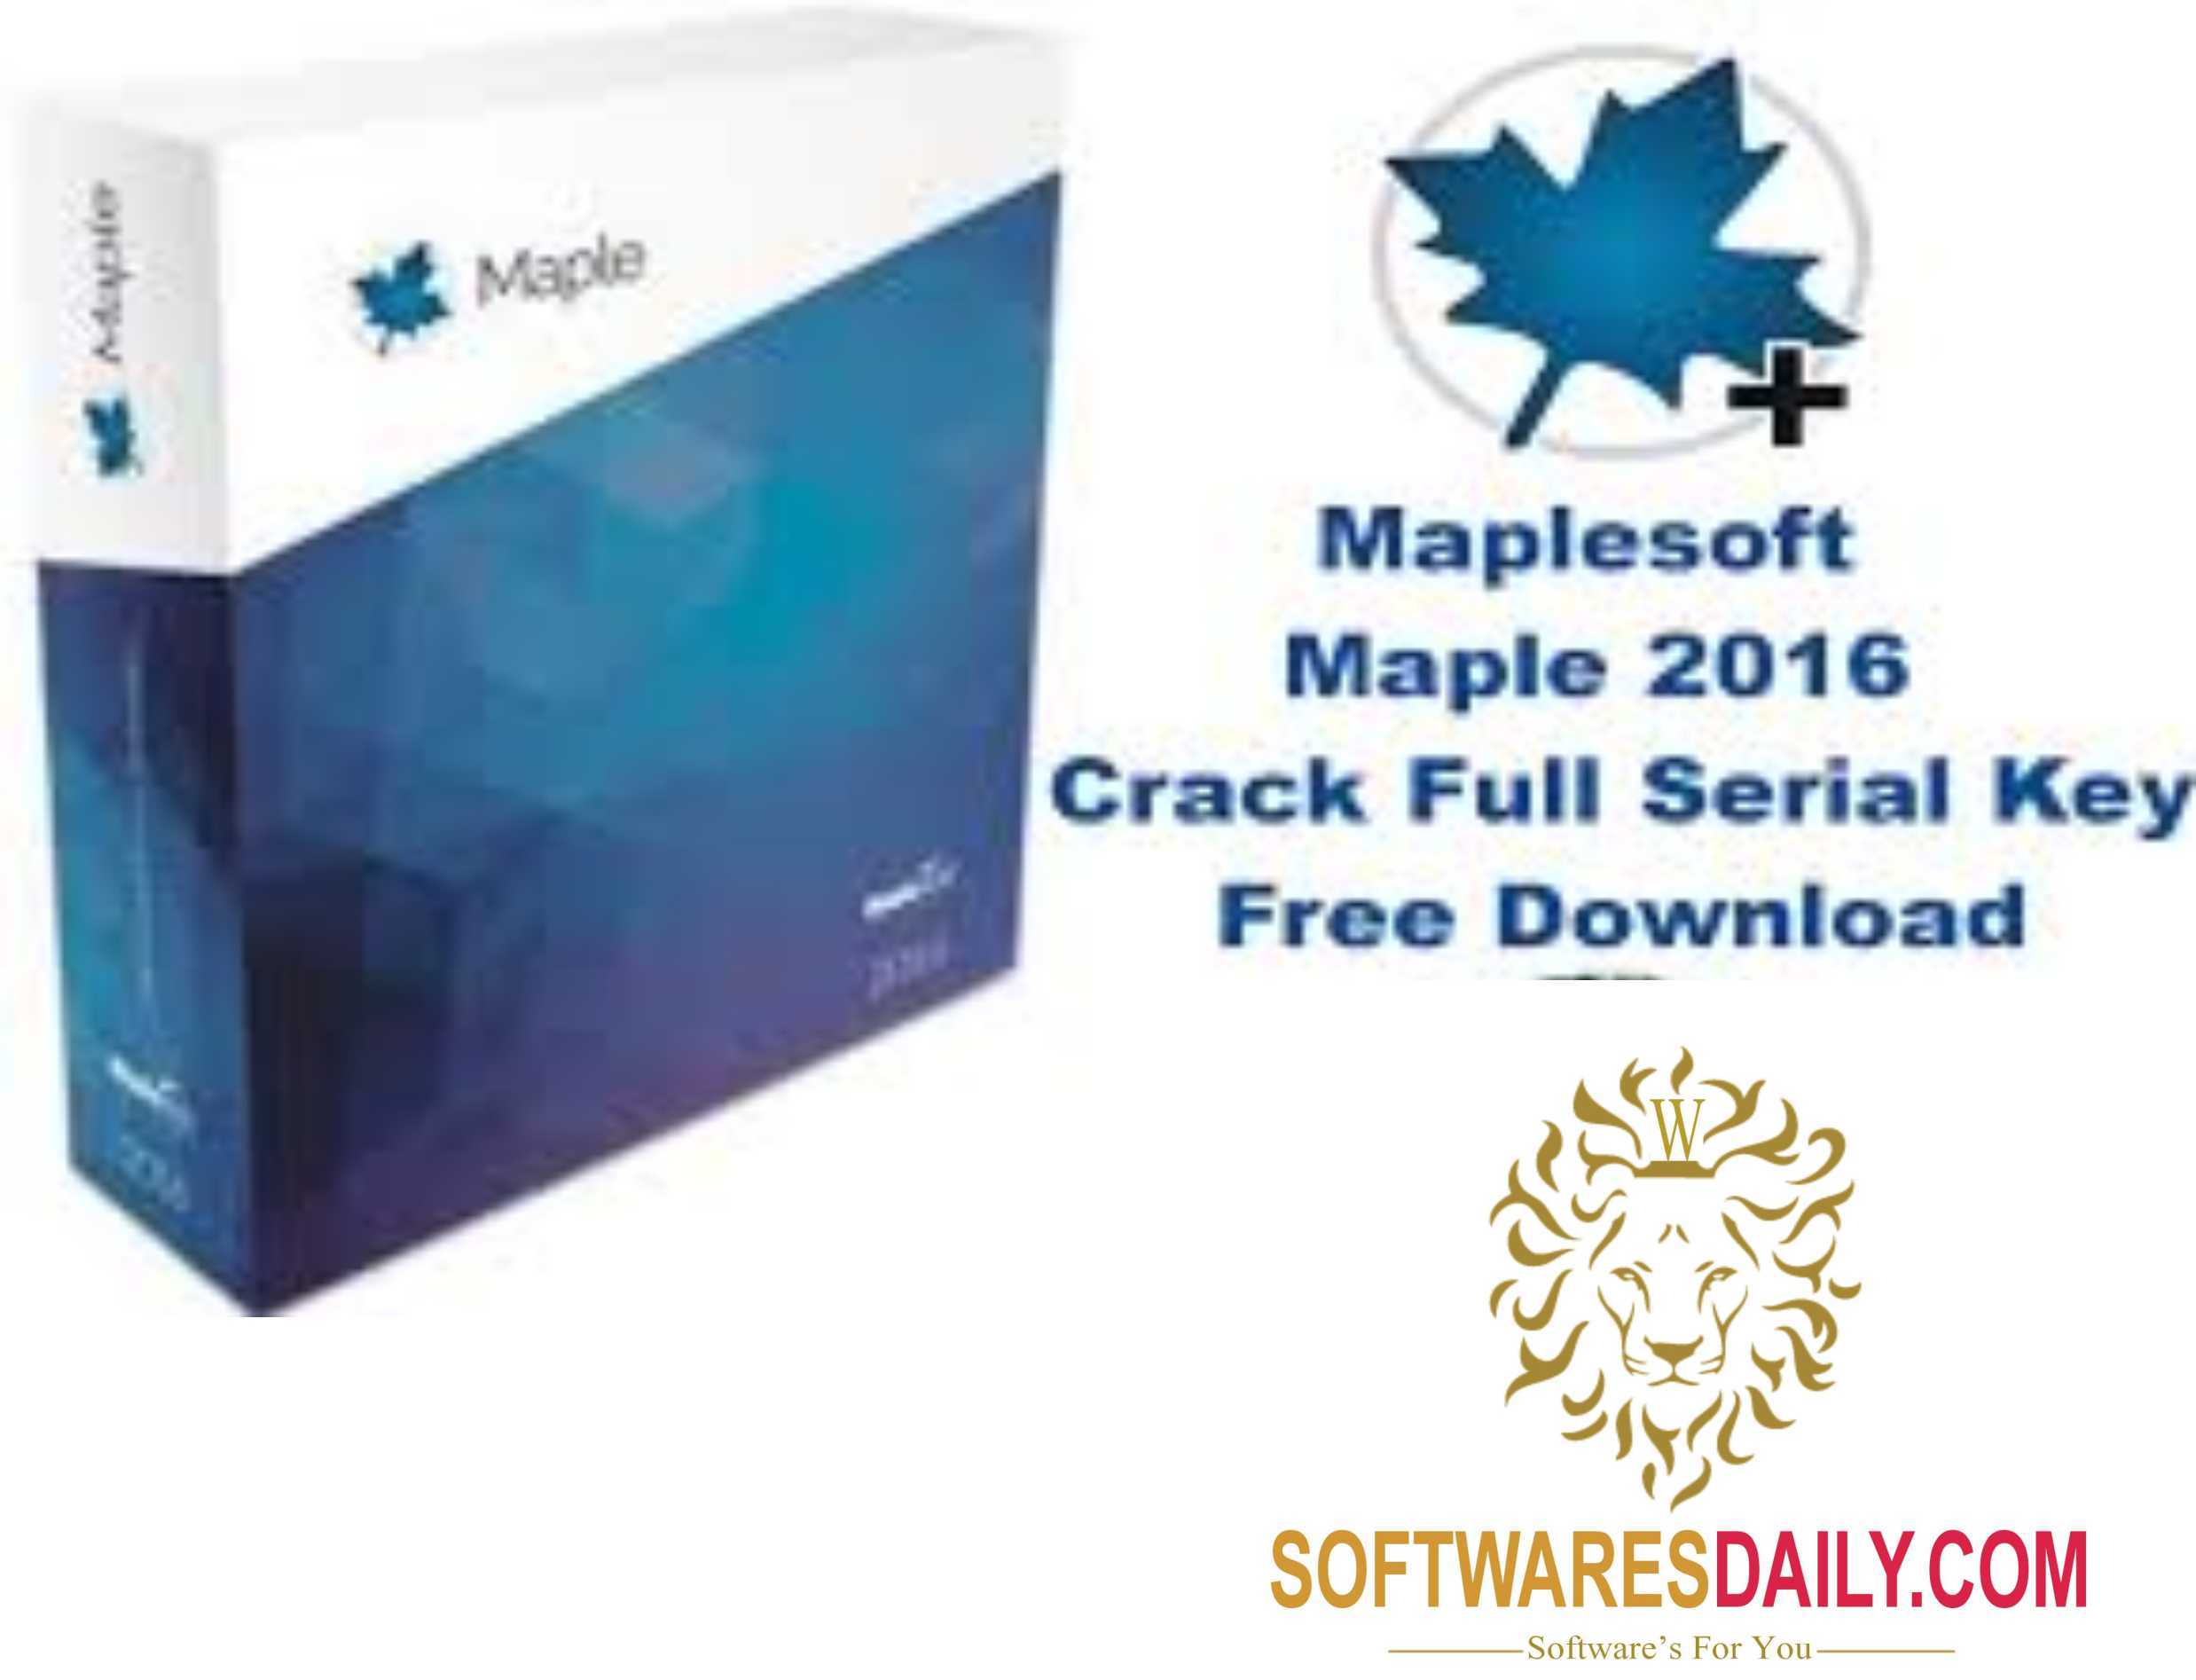 mapinfo 12.5 free download